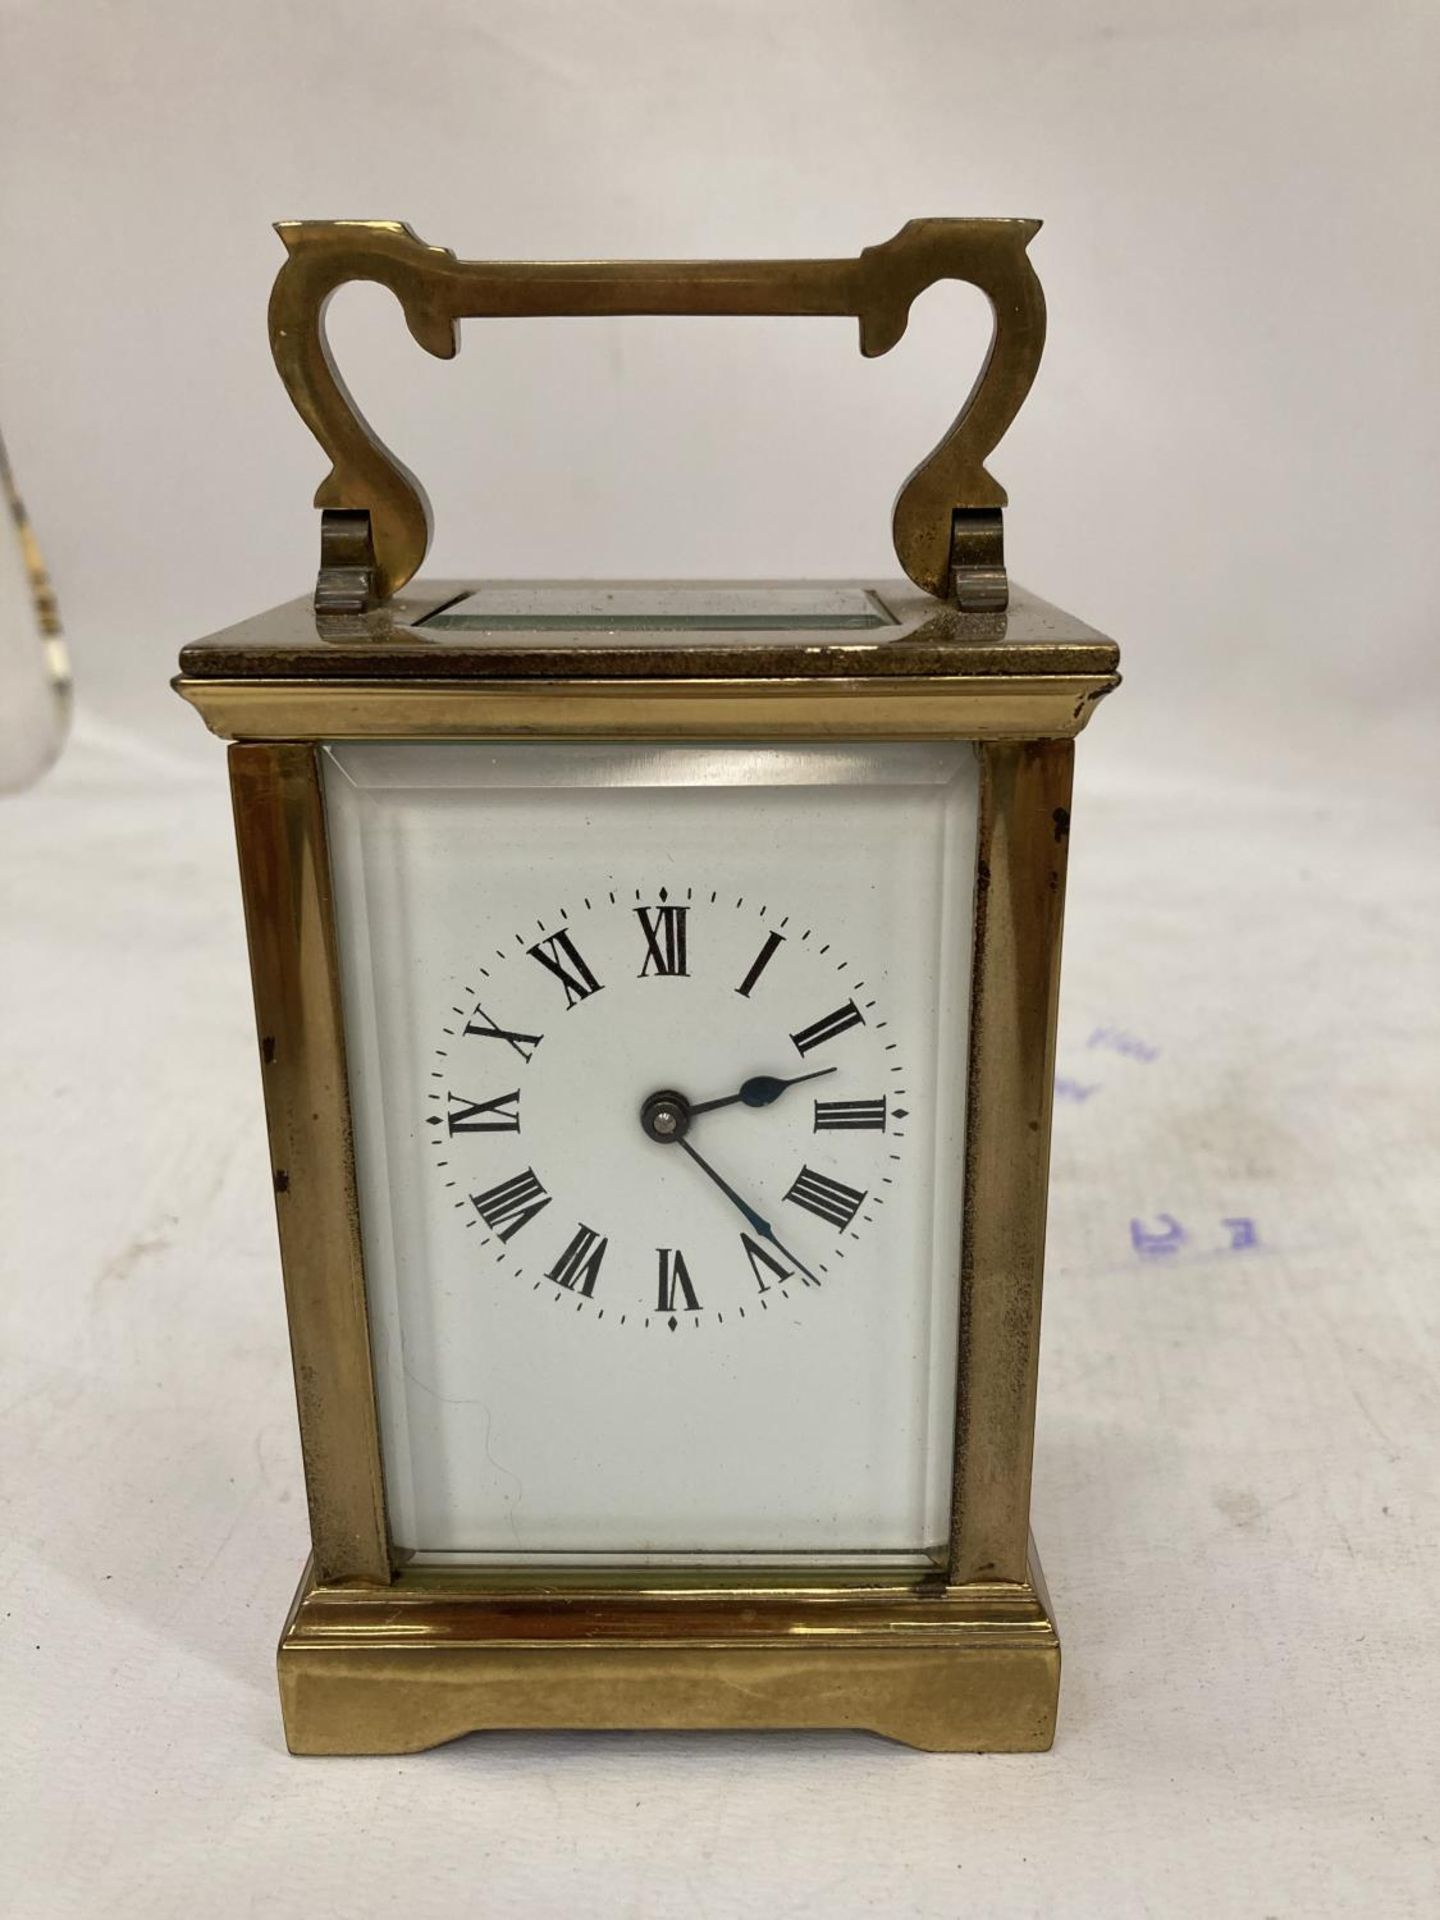 A VINTAGE BRASS CARRIAGE CLOCK WITH BEVELLED GLASS PANELS, GLASS SERVING BOWLS IN A GILT HOLDER, A - Image 2 of 4